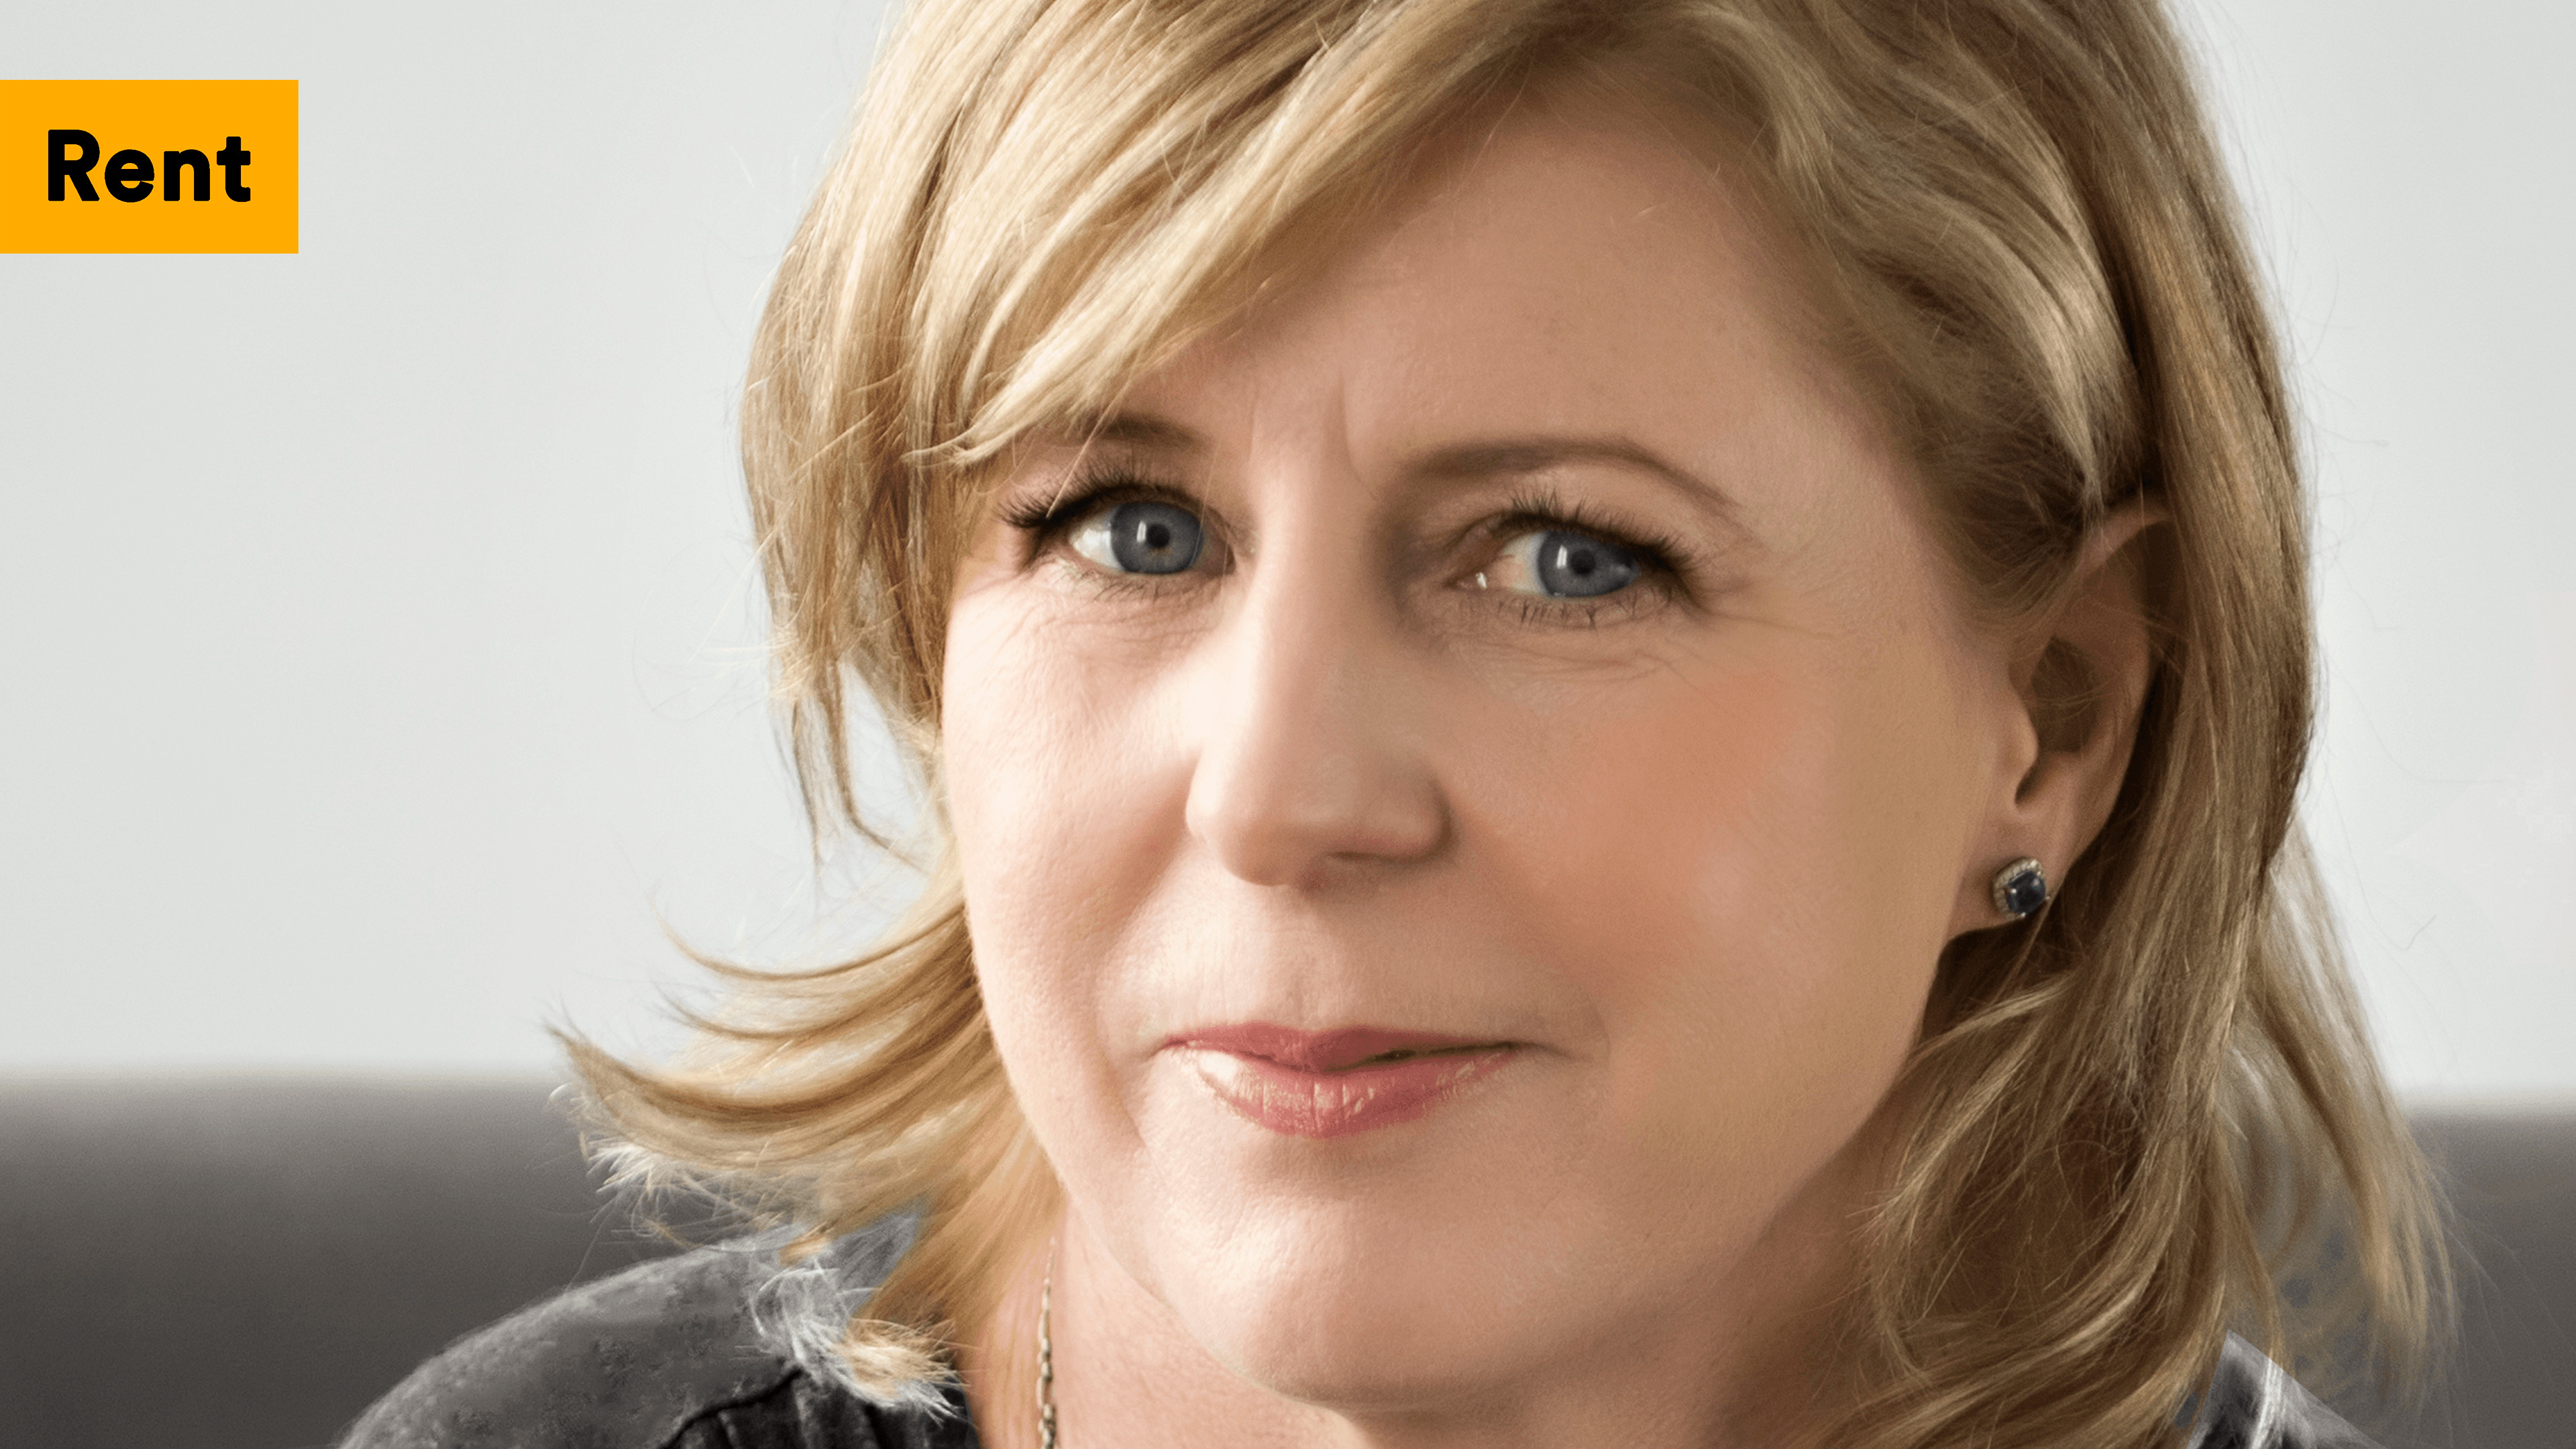 liane moriarty apples never fall